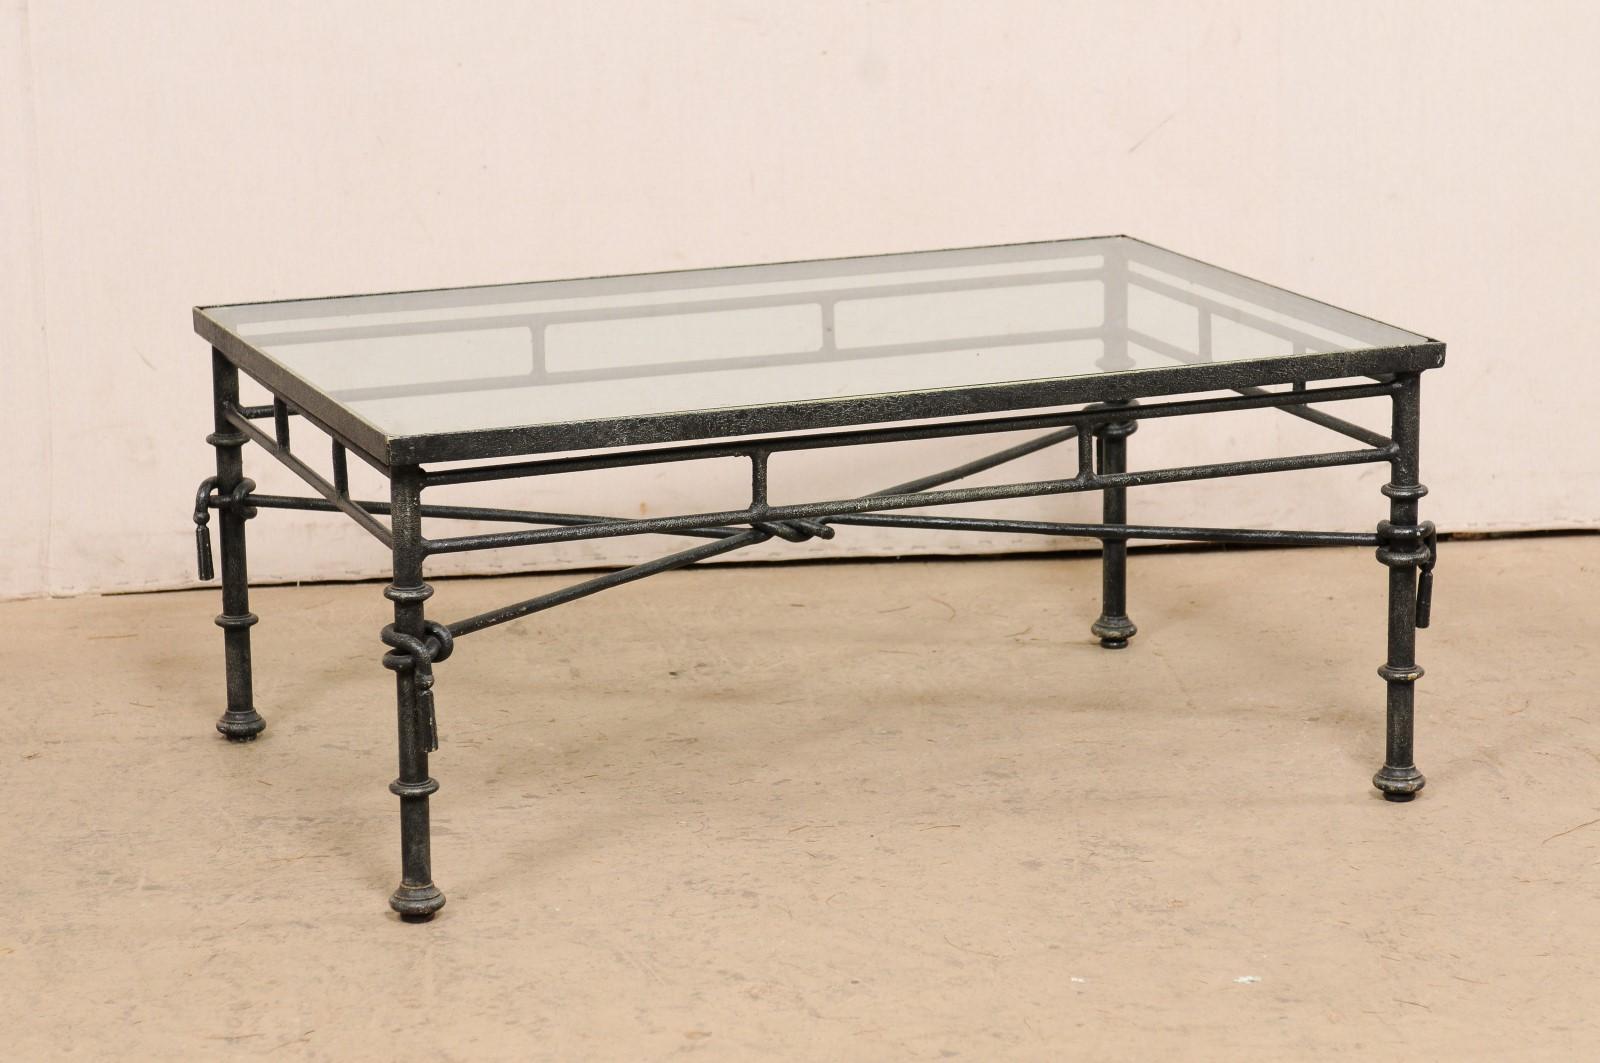 An Italian Neoclassical style table with glass top. This vintage table from Italy, with it's Neoclassical influences, has a rectangular-shaped glass top, which rests within an iron frame and base. The iron base of this table is open and airy, there